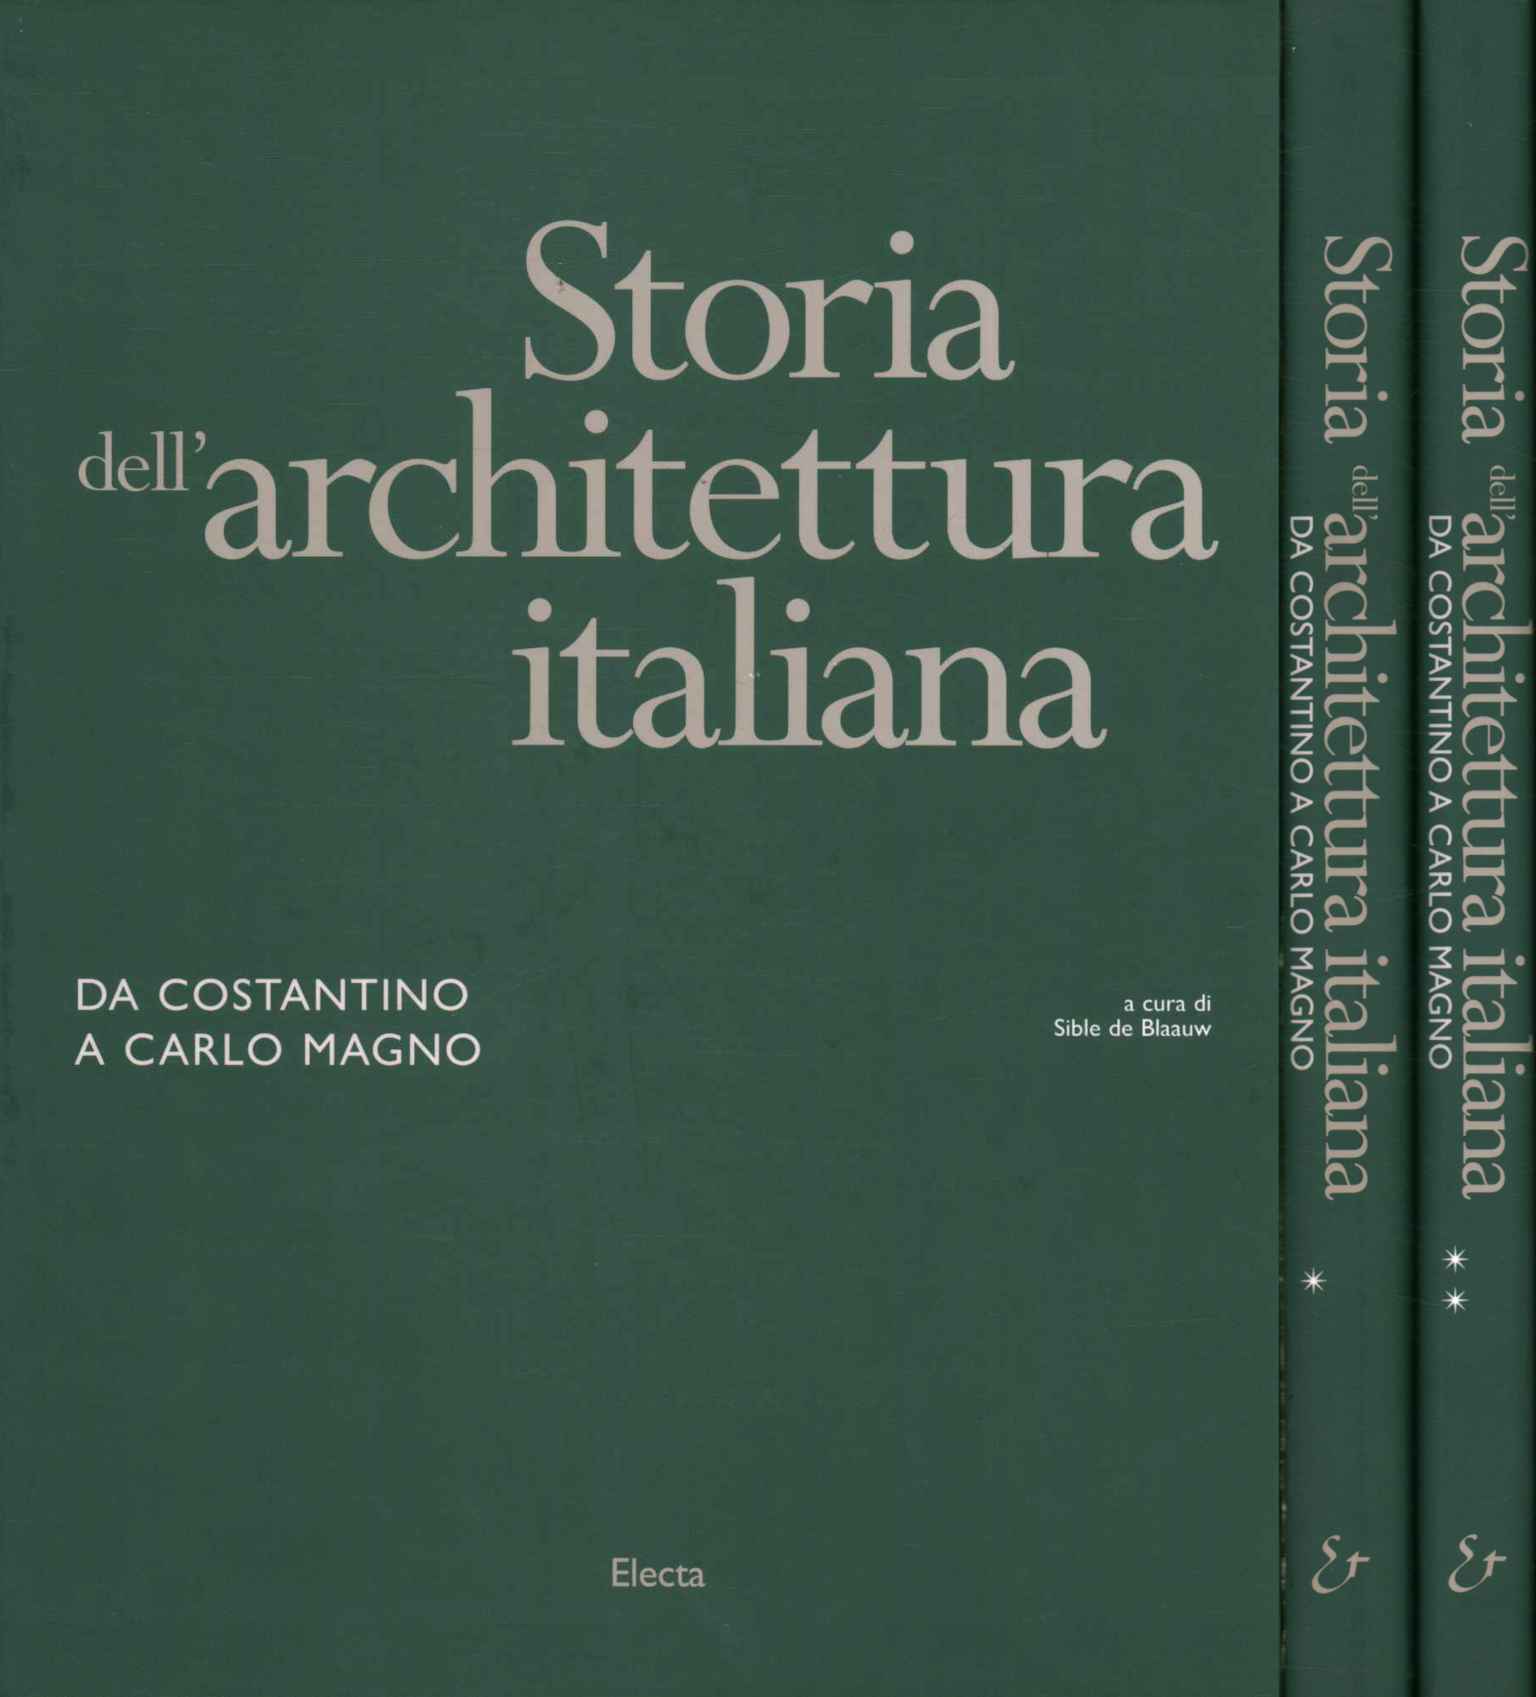 Architecture history. From Cost,History of Italian architecture.%,History of Italian architecture.%,History of Italian architecture.%